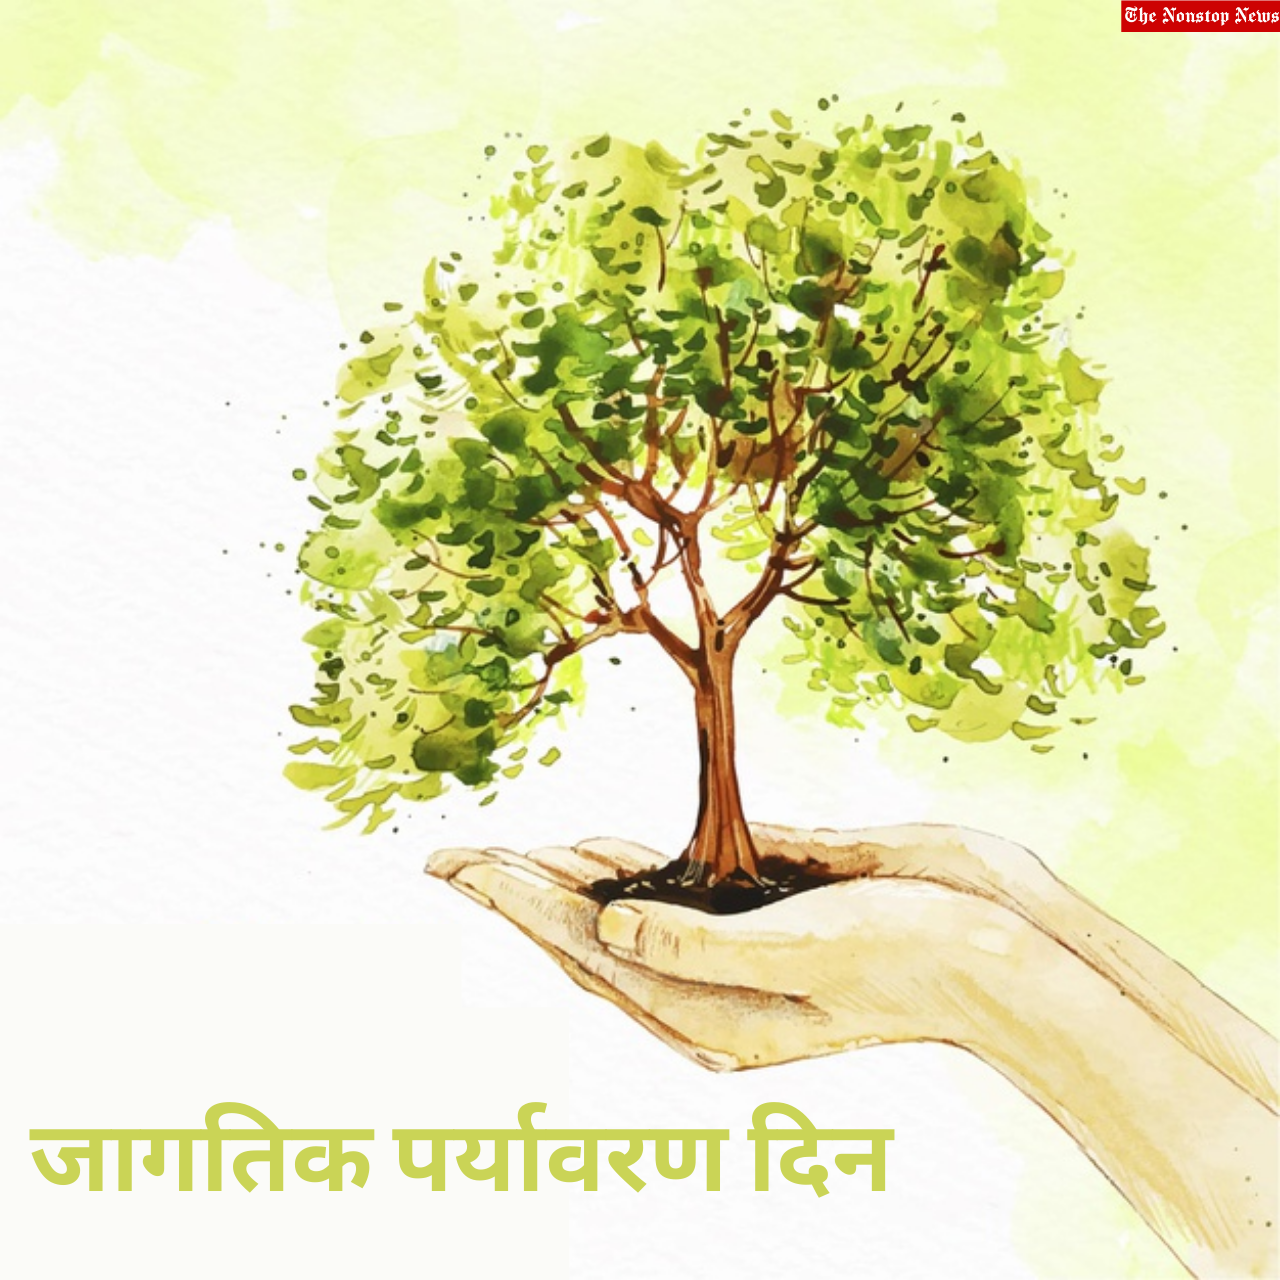 World Environment Day 2021: Marathi and Gujarati Quotes, Wishes, Status, Greetings, and Messages to Share